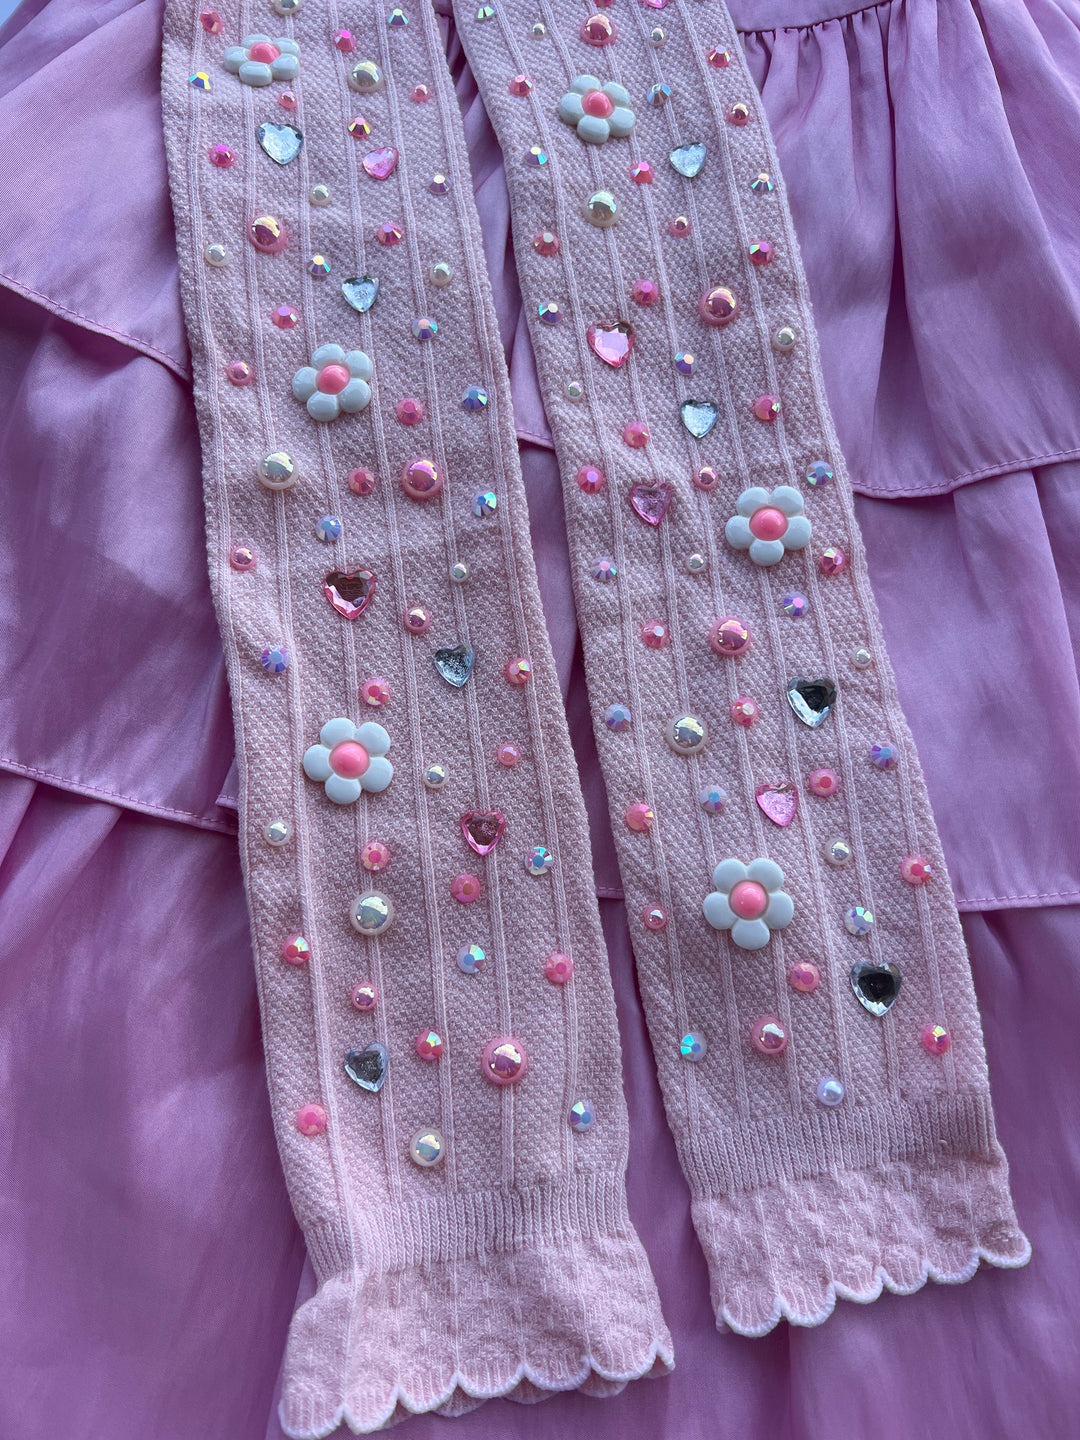 Gimme All The Gemmie Tights 👻💖 The sweetest embellished tights are  available now at siennassunnies.com